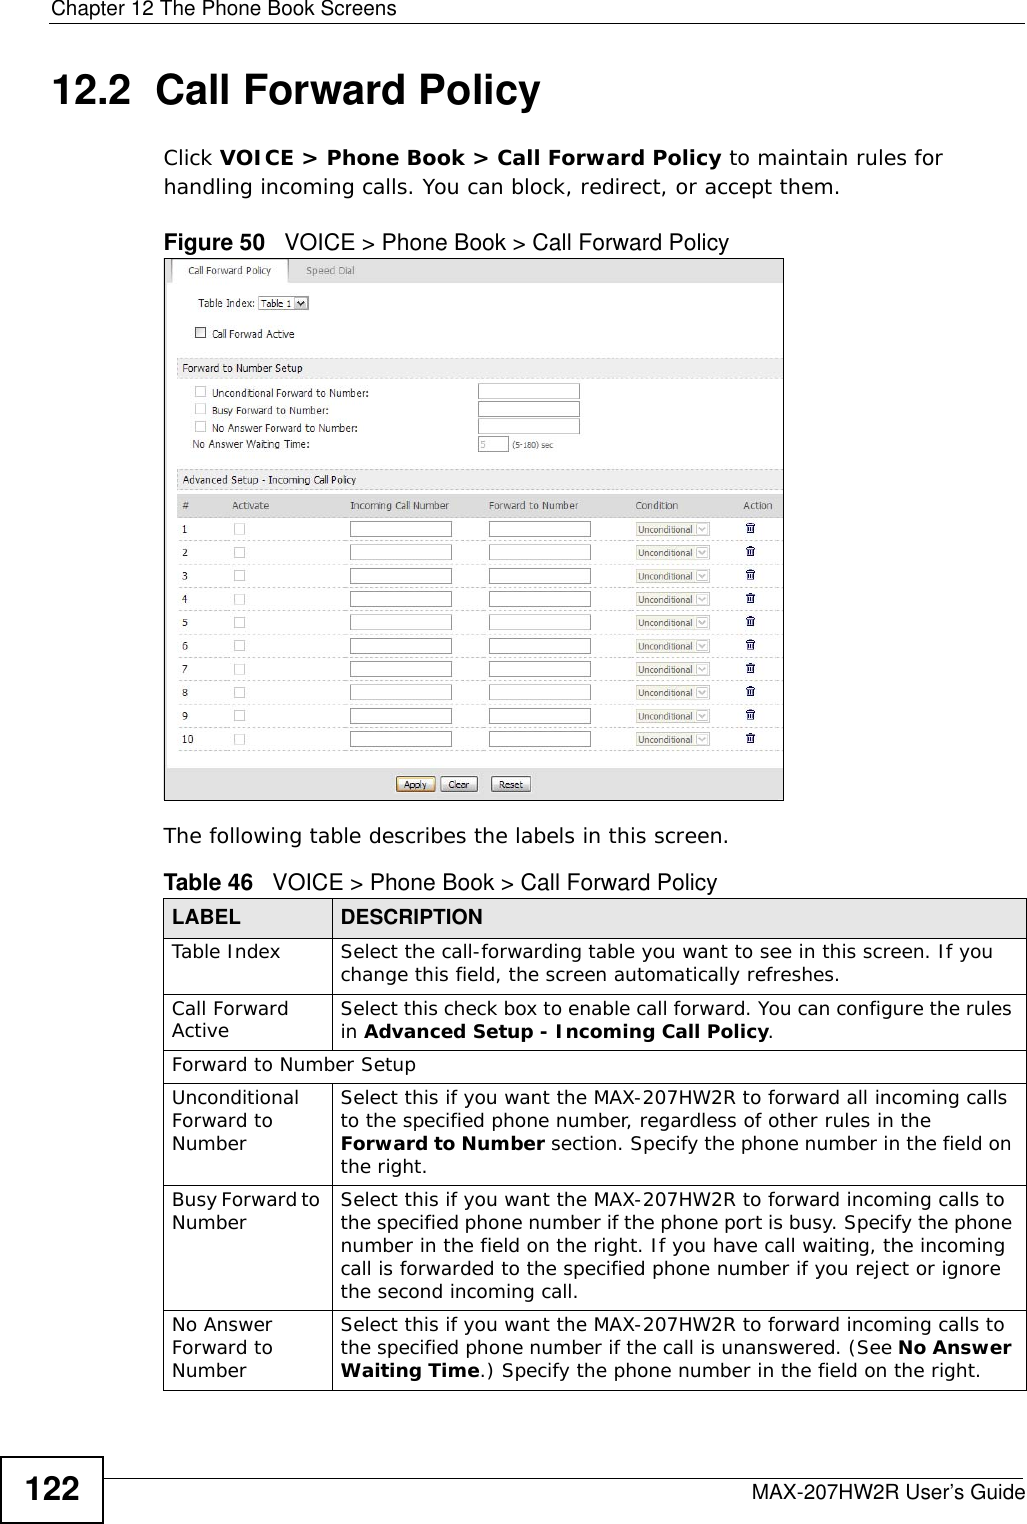 Chapter 12 The Phone Book ScreensMAX-207HW2R User’s Guide12212.2  Call Forward PolicyClick VOICE &gt; Phone Book &gt; Call Forward Policy to maintain rules for handling incoming calls. You can block, redirect, or accept them.Figure 50   VOICE &gt; Phone Book &gt; Call Forward PolicyThe following table describes the labels in this screen.  Table 46   VOICE &gt; Phone Book &gt; Call Forward PolicyLABEL DESCRIPTIONTable Index Select the call-forwarding table you want to see in this screen. If you change this field, the screen automatically refreshes.Call Forward Active Select this check box to enable call forward. You can configure the rules in Advanced Setup - Incoming Call Policy.Forward to Number SetupUnconditional Forward to NumberSelect this if you want the MAX-207HW2R to forward all incoming calls to the specified phone number, regardless of other rules in the Forward to Number section. Specify the phone number in the field on the right.Busy Forward to Number Select this if you want the MAX-207HW2R to forward incoming calls to the specified phone number if the phone port is busy. Specify the phone number in the field on the right. If you have call waiting, the incoming call is forwarded to the specified phone number if you reject or ignore the second incoming call.No Answer Forward to NumberSelect this if you want the MAX-207HW2R to forward incoming calls to the specified phone number if the call is unanswered. (See No Answer Waiting Time.) Specify the phone number in the field on the right.